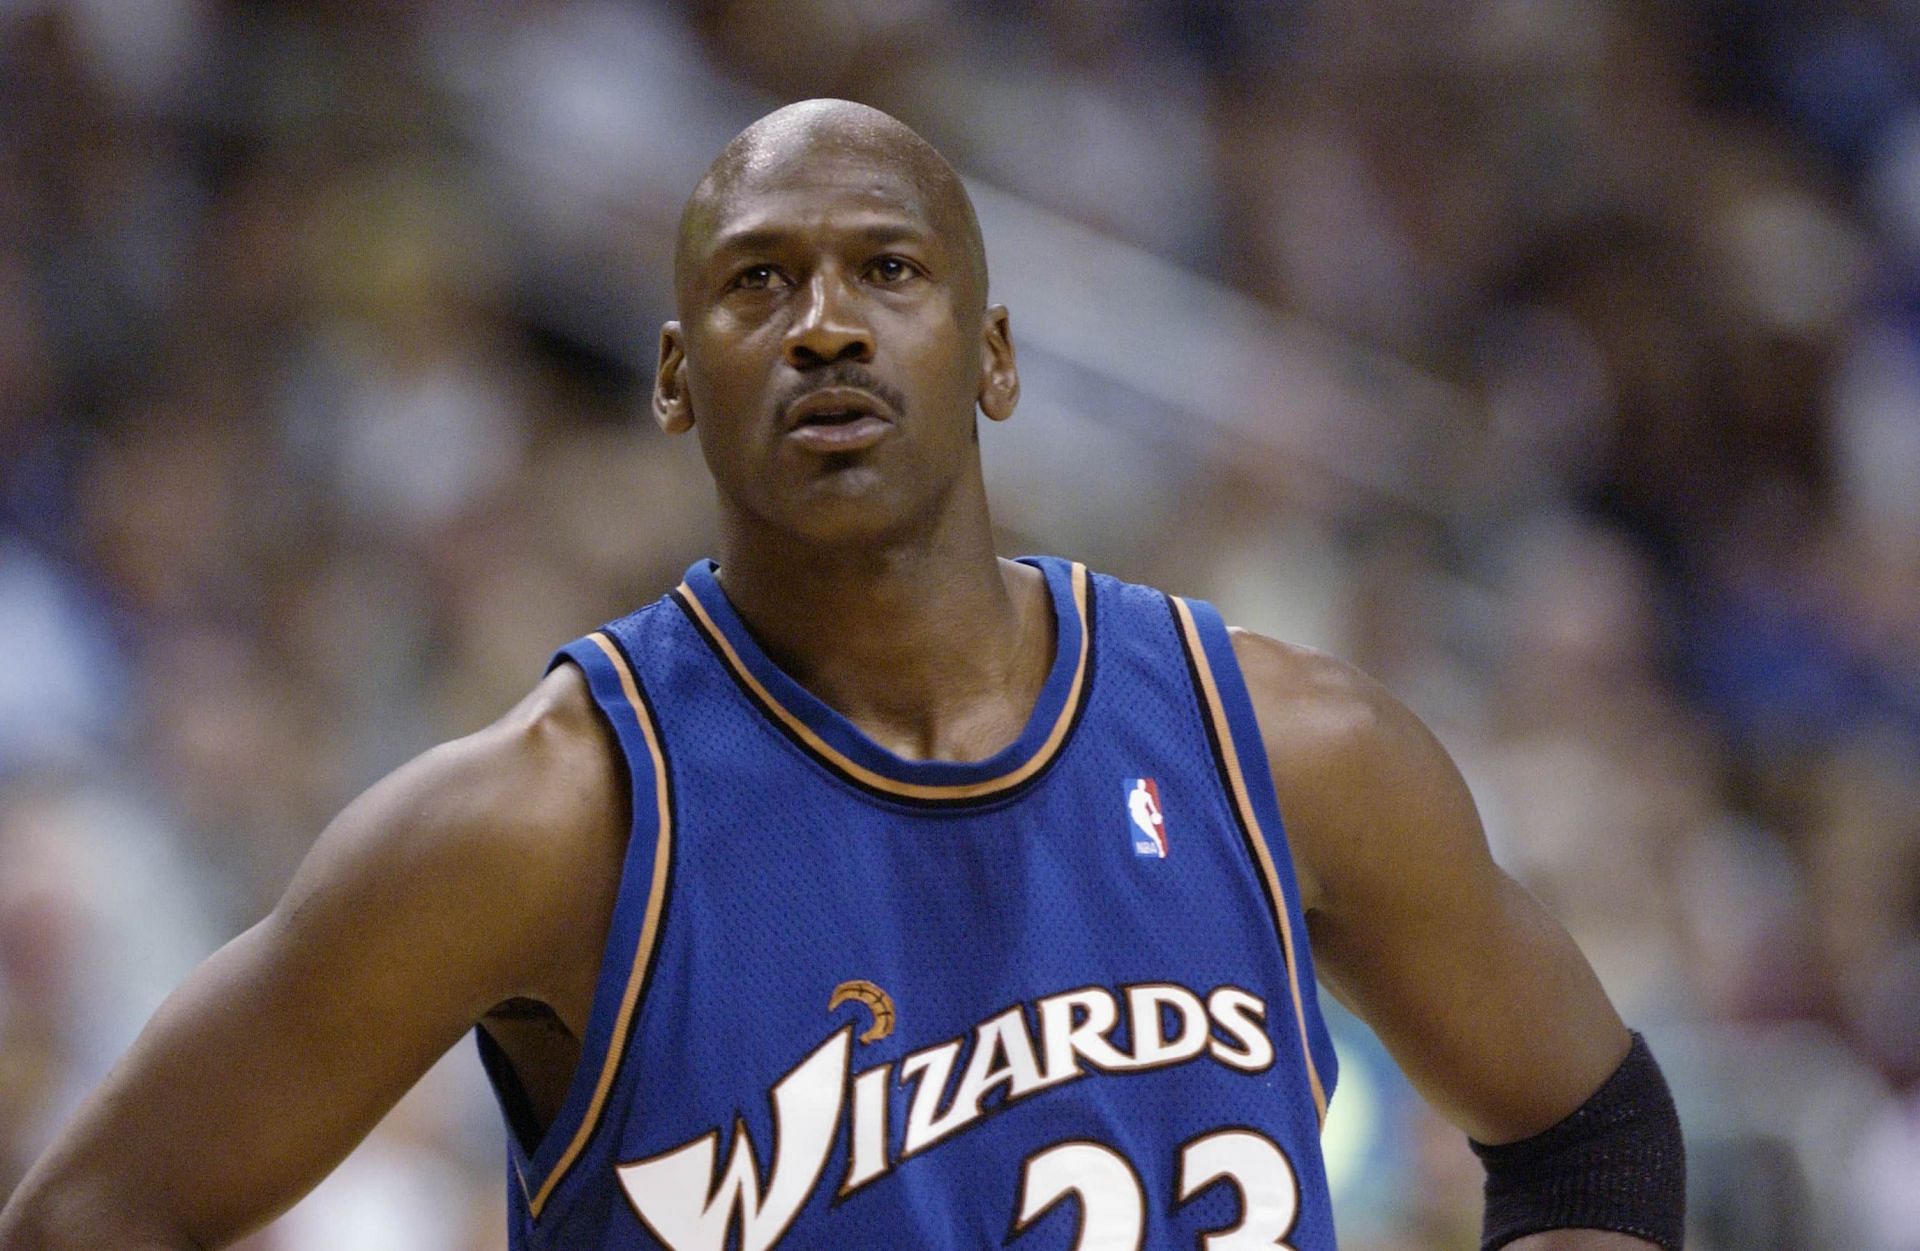 Michael Jordan during his stint with the Washinton Wizards.